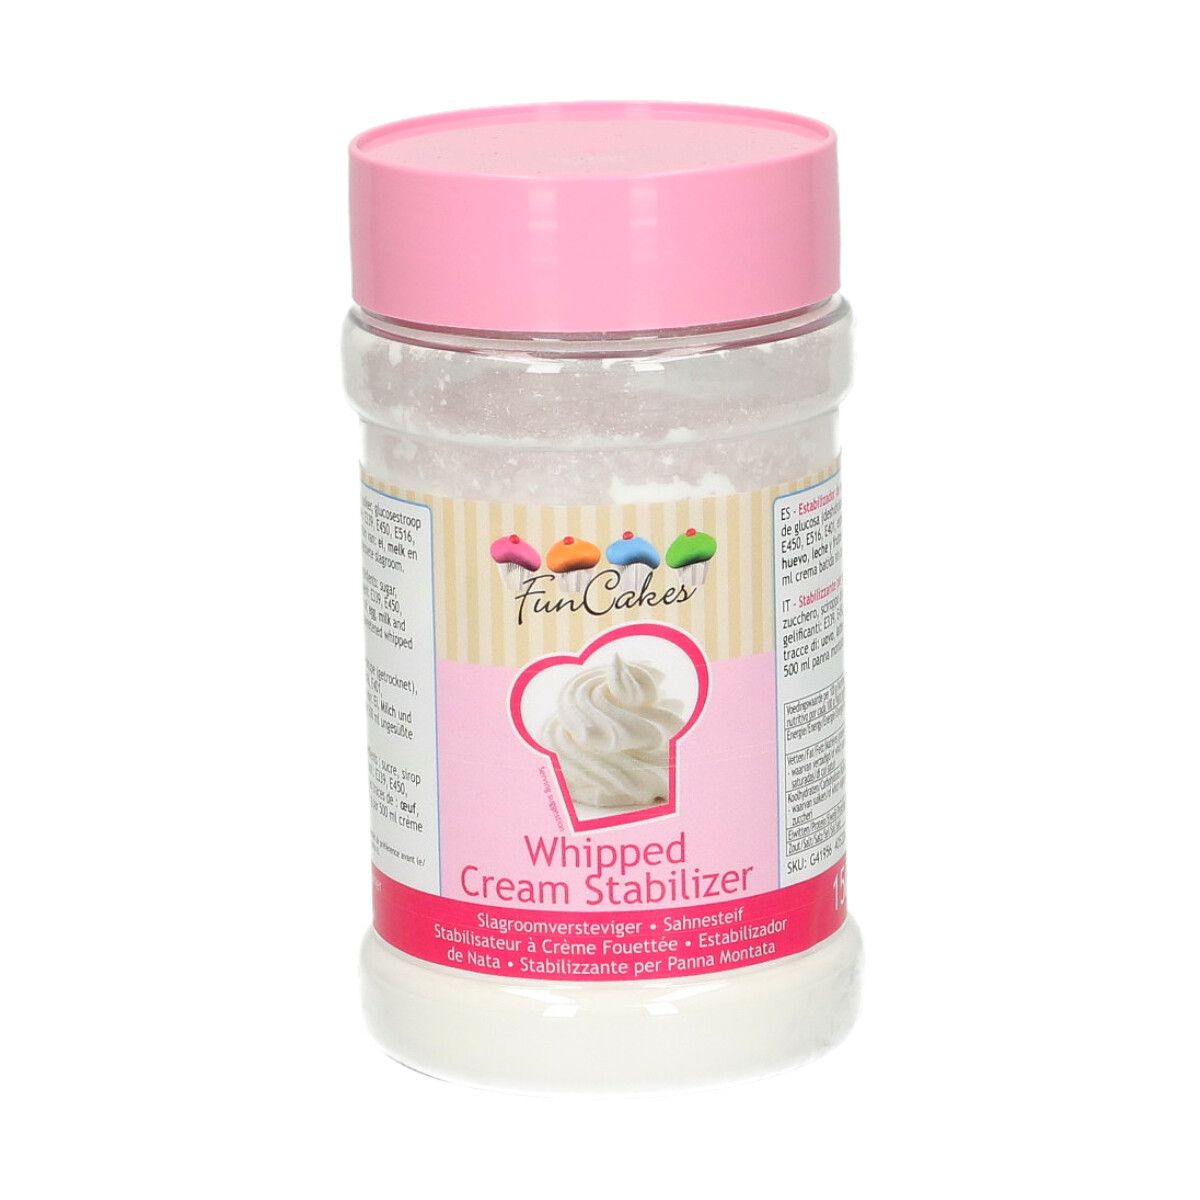 WHIPPED CREAM STABILIZER - SWEETENED 150G